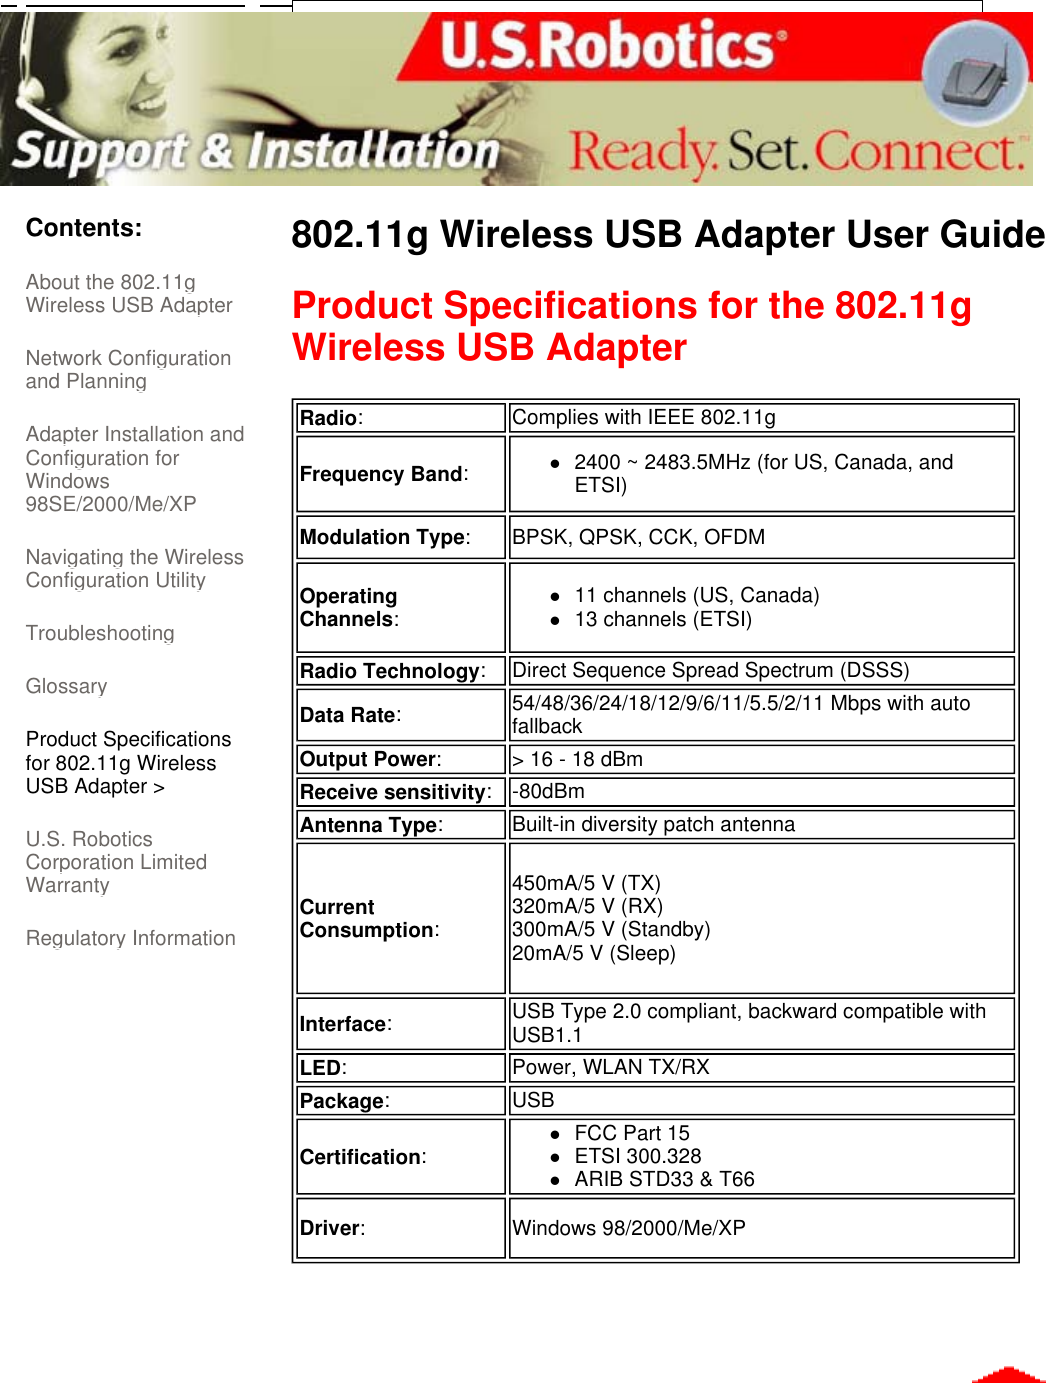      Contents: About the 802.11g Wireless USB Adapter  Network Configuration and Planning  Adapter Installation and Configuration for Windows 98SE/2000/Me/XP  Navigating the Wireless Configuration Utility Troubleshooting Glossary Product Specifications for 802.11g Wireless USB Adapter &gt; U.S. Robotics Corporation Limited Warranty  Regulatory Information 802.11g Wireless USB Adapter User Guide Product Specifications for the 802.11g Wireless USB Adapter      Radio:Complies with IEEE 802.11gFrequency Band:z2400 ~ 2483.5MHz (for US, Canada, and ETSI)  Modulation Type:BPSK, QPSK, CCK, OFDM Operating Channels:z11 channels (US, Canada)  z13 channels (ETSI)  Radio Technology:Direct Sequence Spread Spectrum (DSSS)Data Rate:54/48/36/24/18/12/9/6/11/5.5/2/11 Mbps with auto fallback Output Power:&gt; 16 - 18 dBm Receive sensitivity:-80dBm Antenna Type:Built-in diversity patch antennaCurrent Consumption:450mA/5 V (TX) 320mA/5 V (RX) 300mA/5 V (Standby) 20mA/5 V (Sleep) Interface:  USB Type 2.0 compliant, backward compatible with USB1.1LED:Power, WLAN TX/RX Package:USBCertification:zFCC Part 15  zETSI 300.328  zARIB STD33 &amp; T66  Driver:Windows 98/2000/Me/XP 